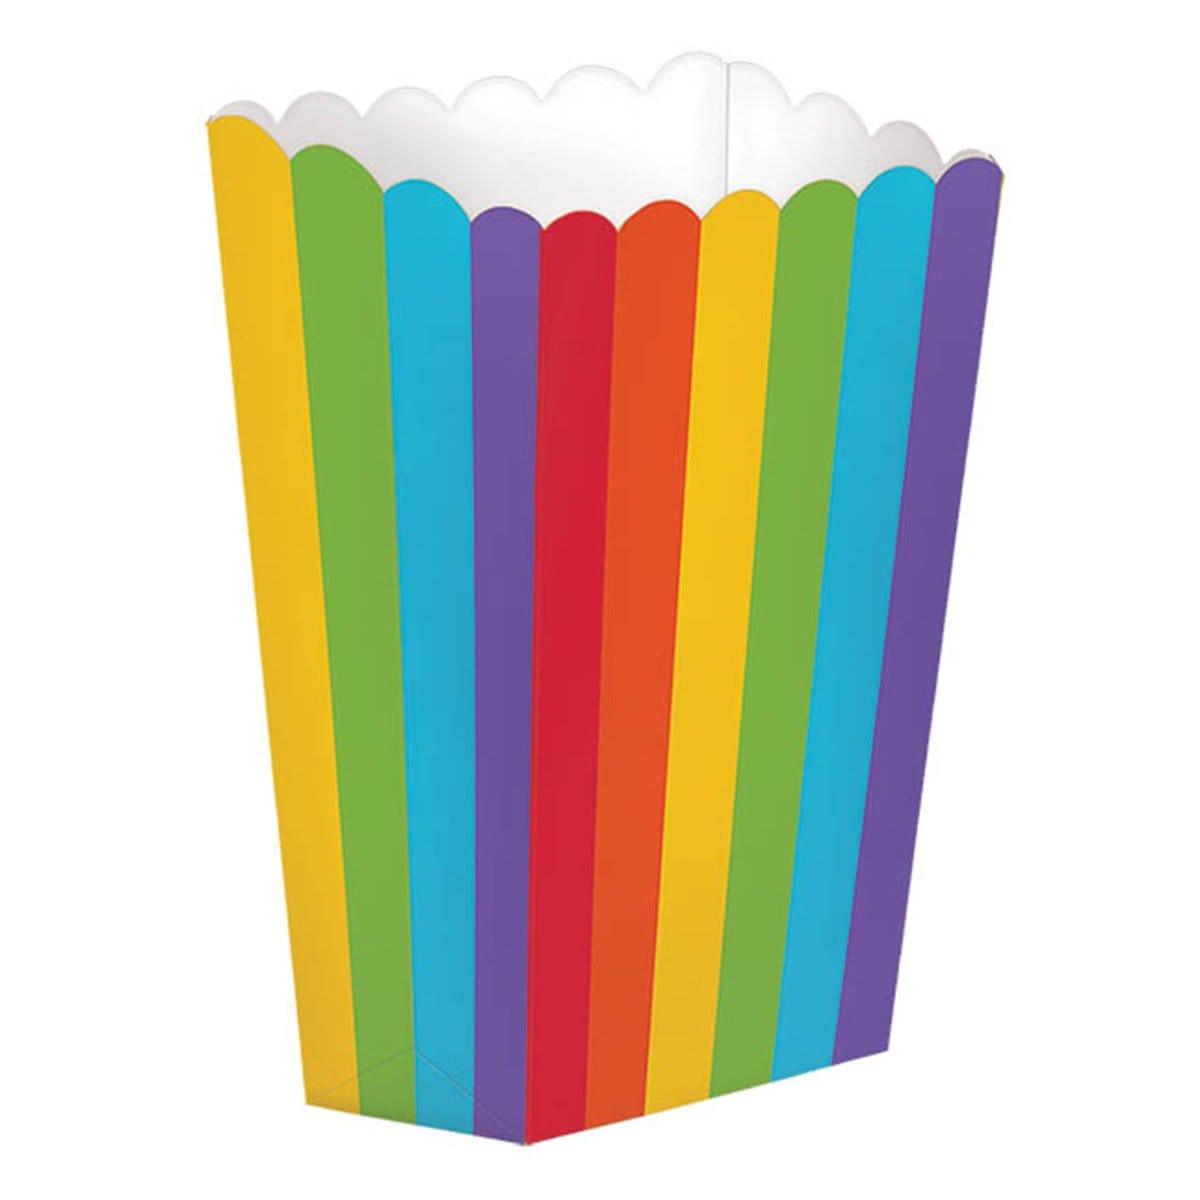 Buy Party Supplies Popcorn Box - rainbow 5/pkg sold at Party Expert